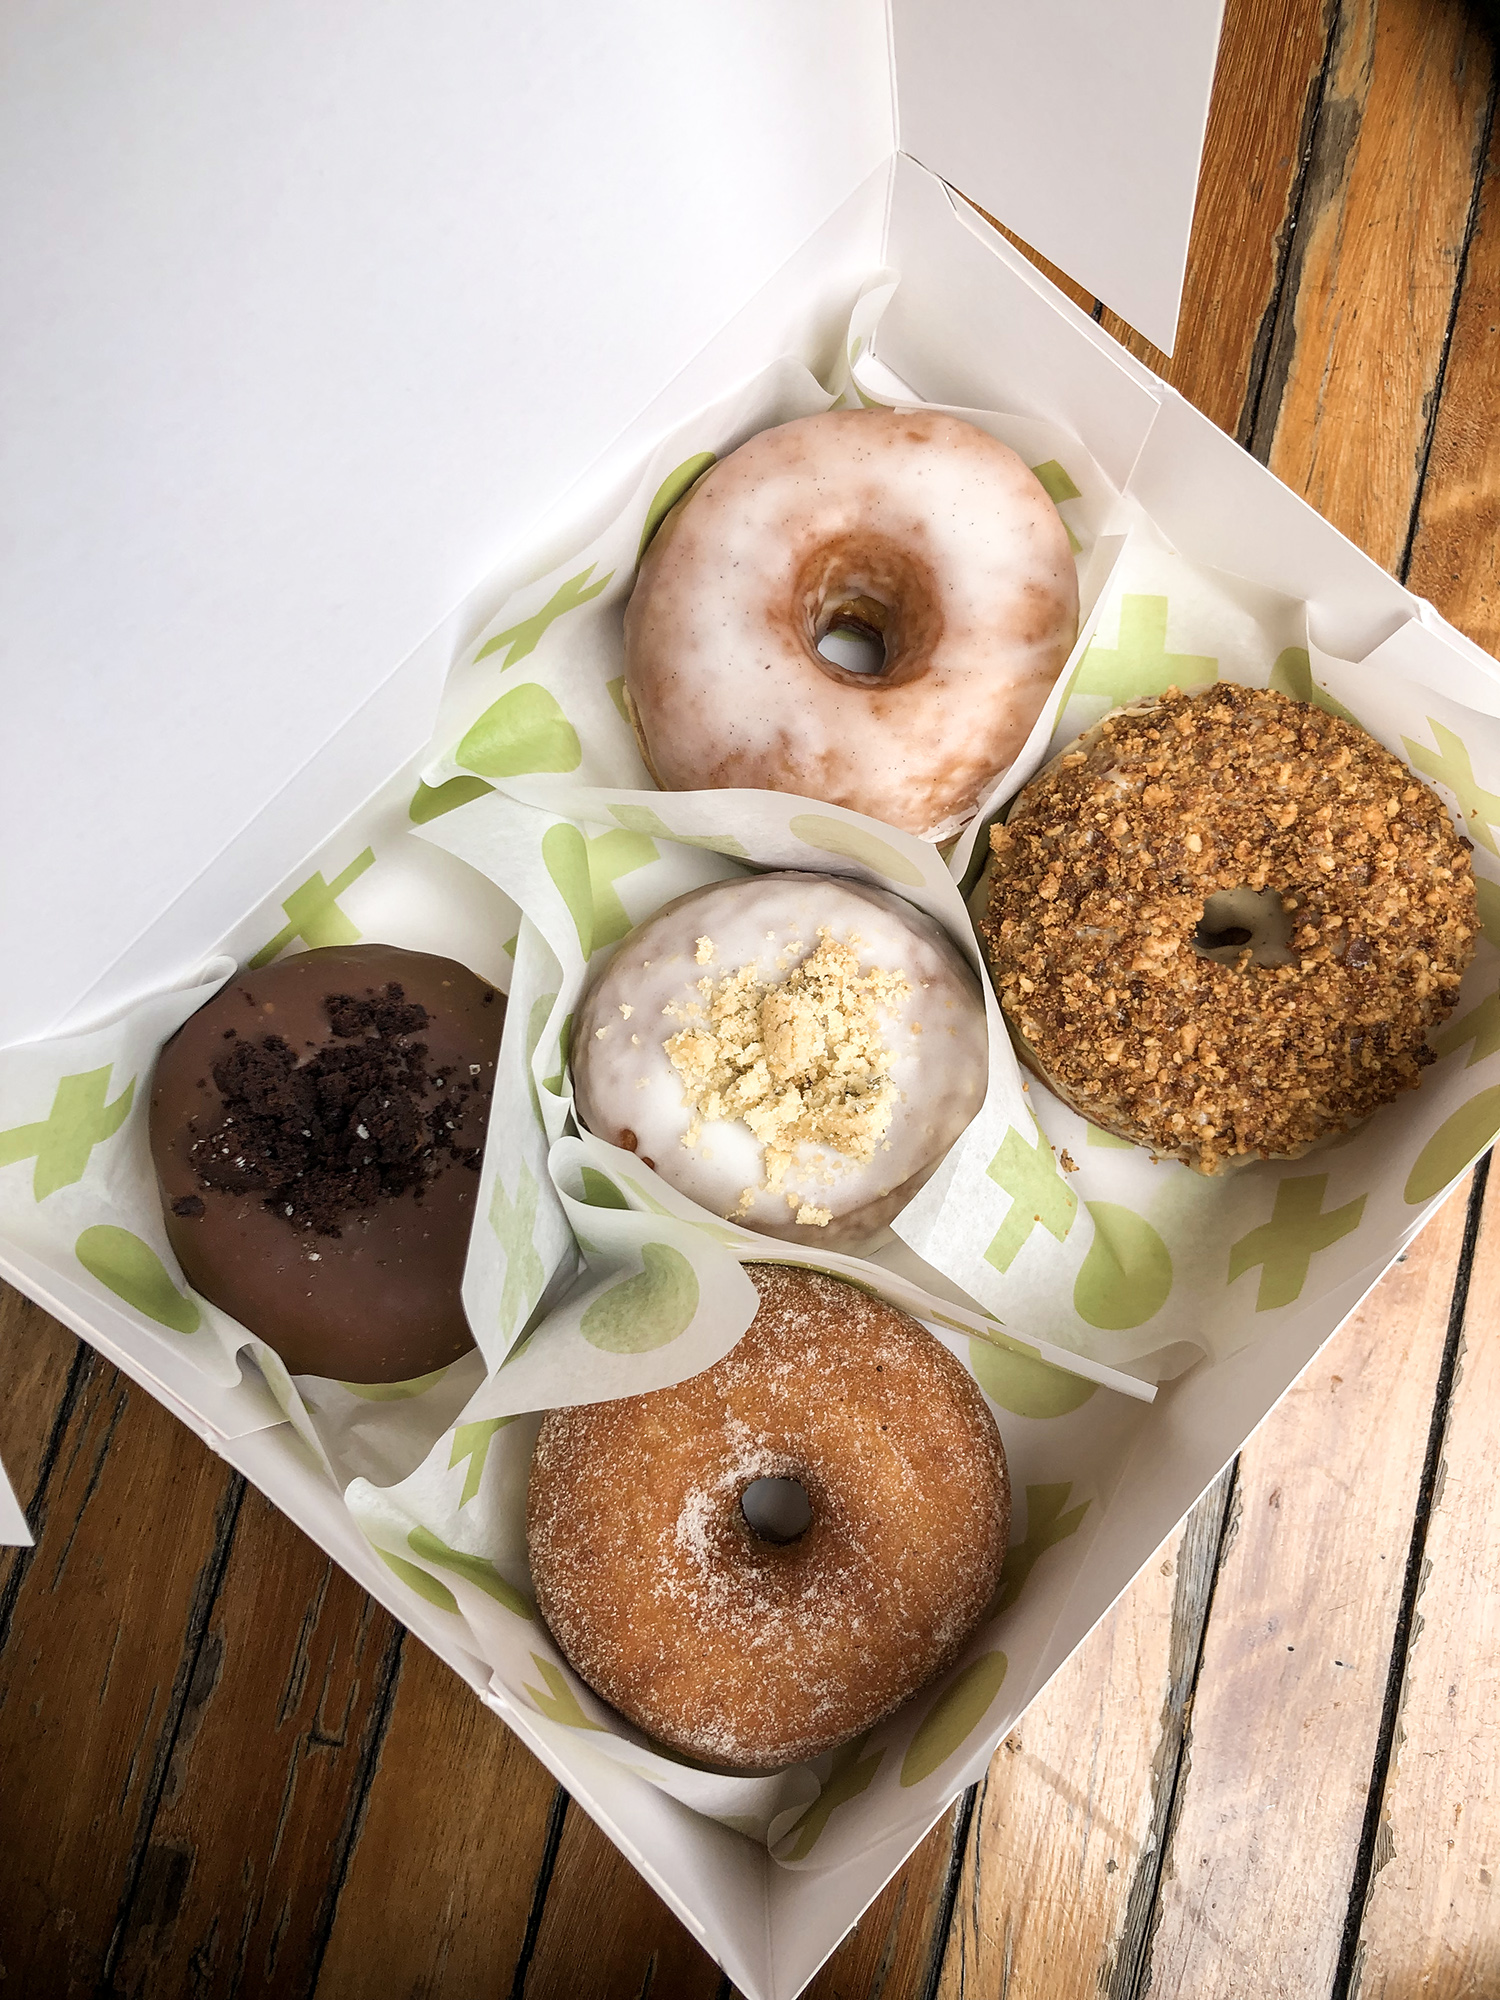 Where to eat in Melbourne doughnuts from Shortstop